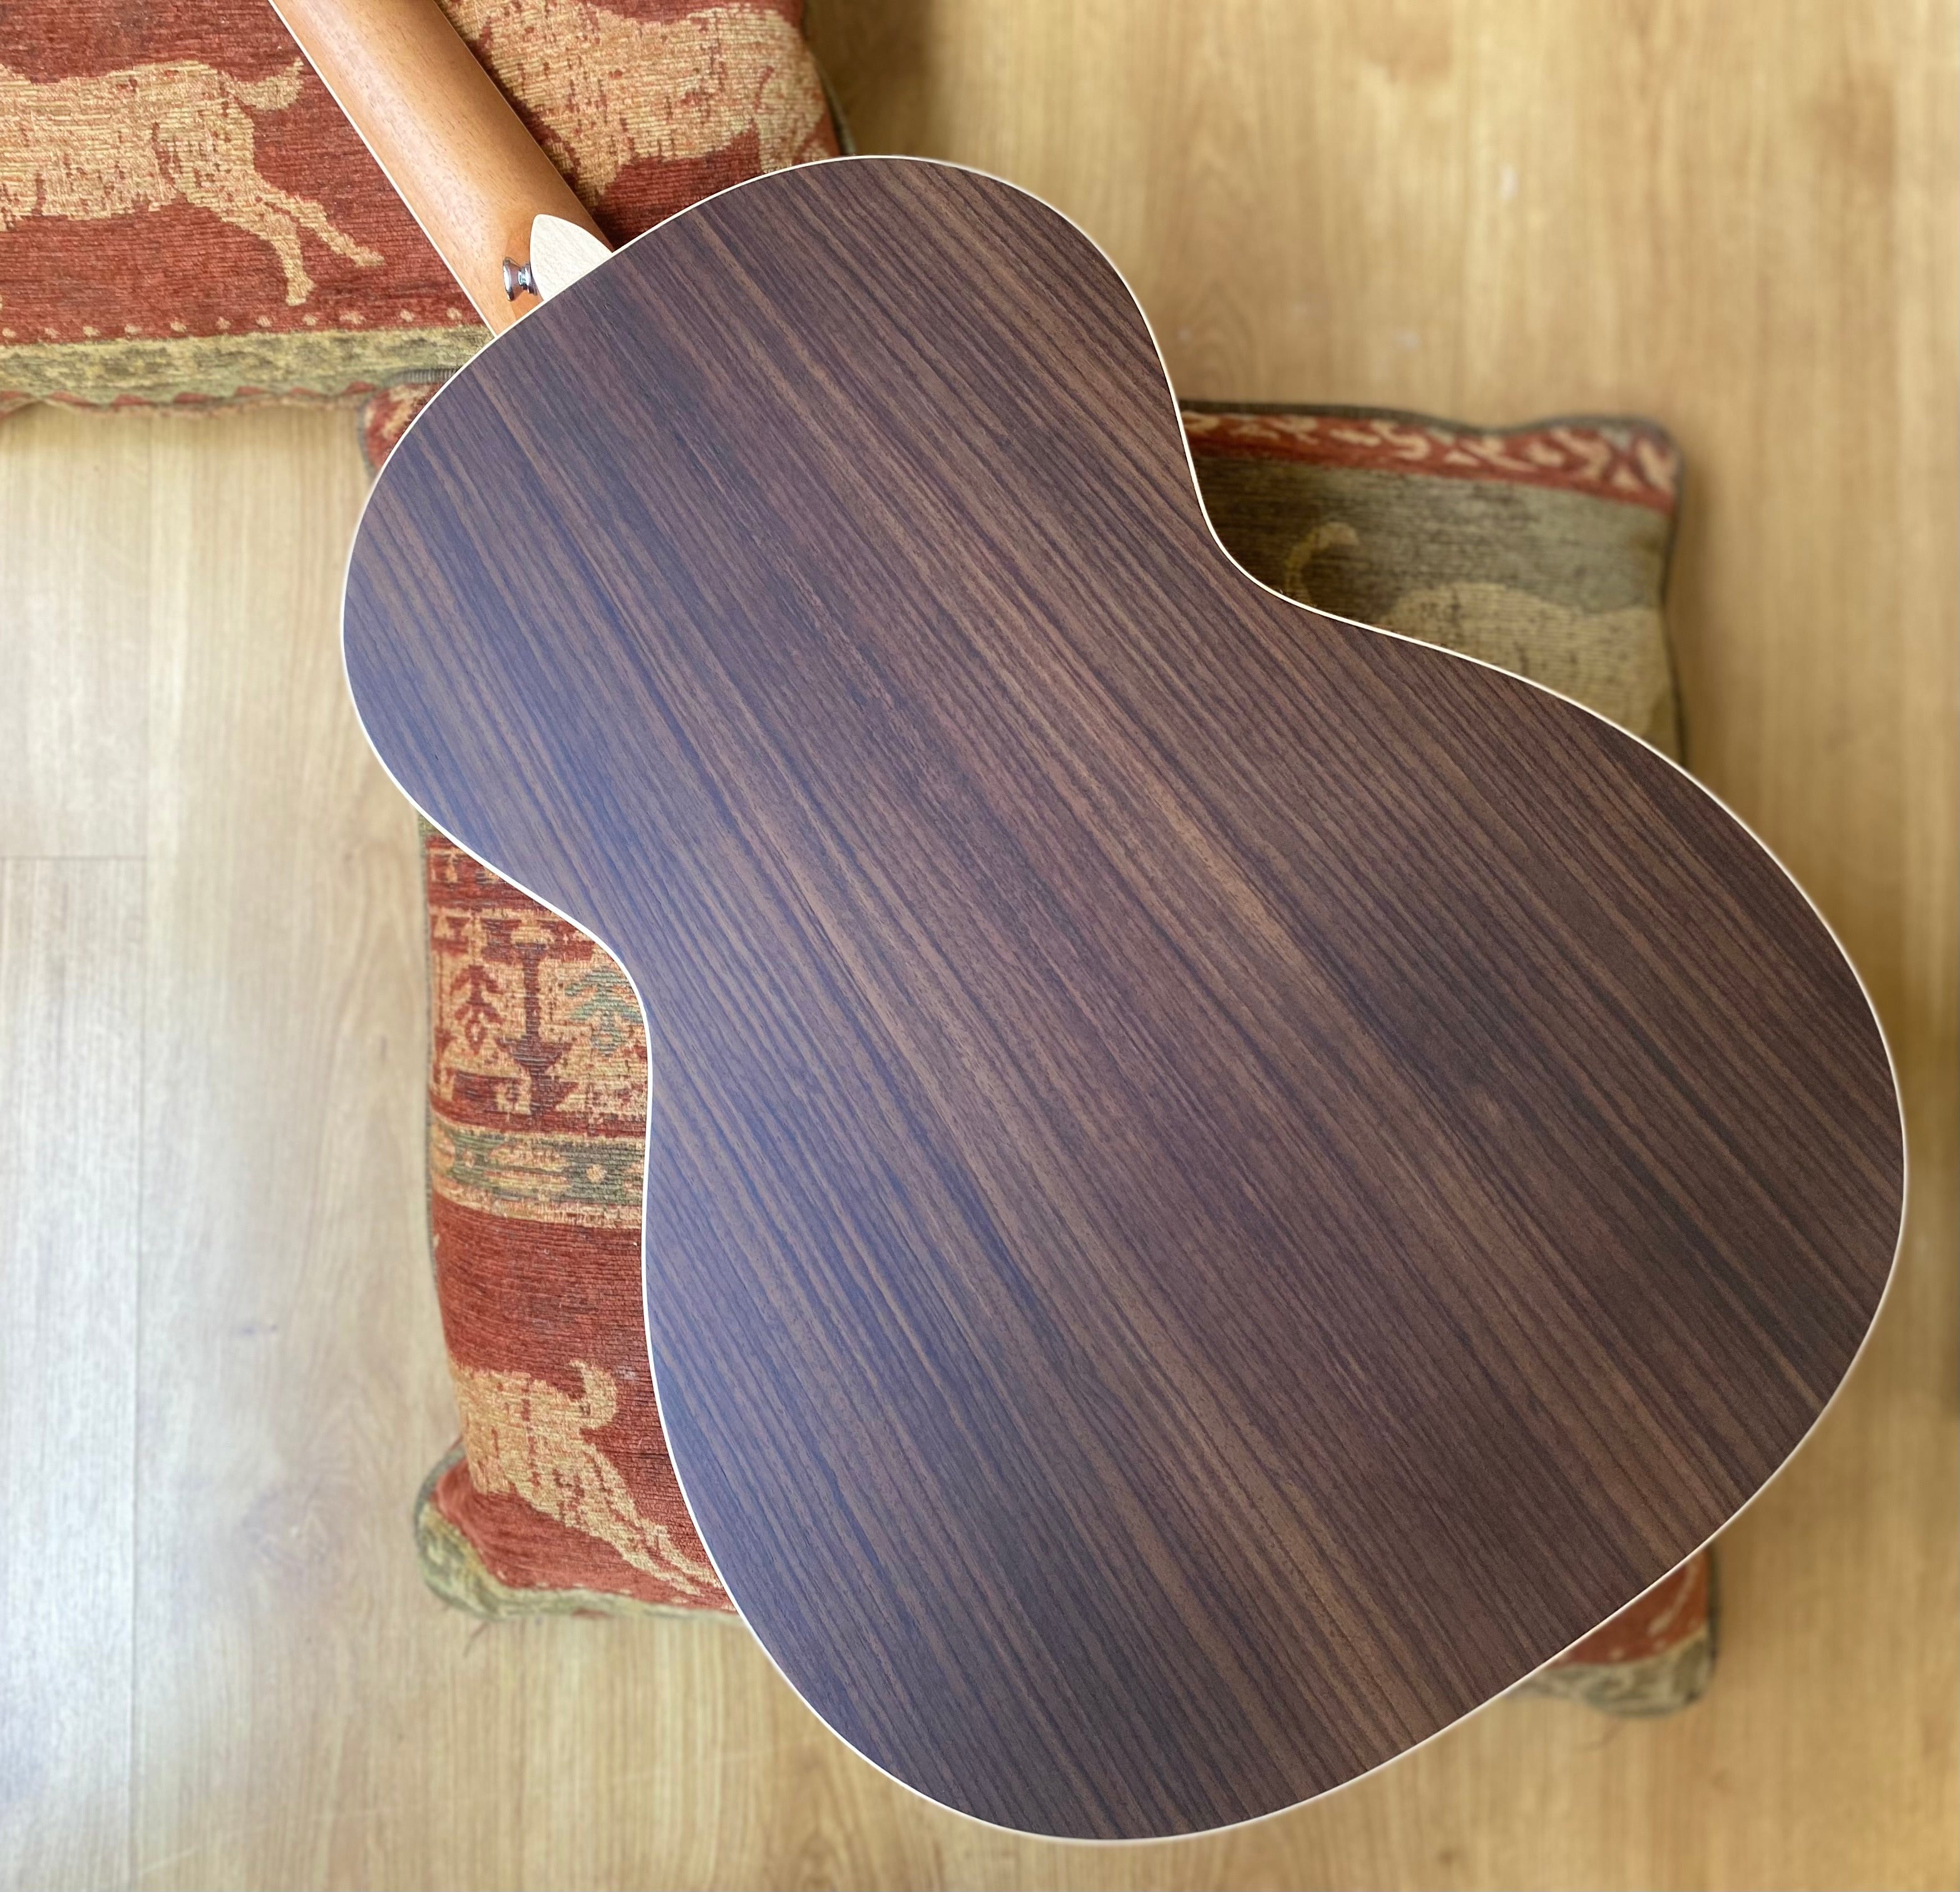 Auden Neo 45 Chester Cedar/Rosewood Full body., Electro Acoustic Guitar for sale at Richards Guitars.